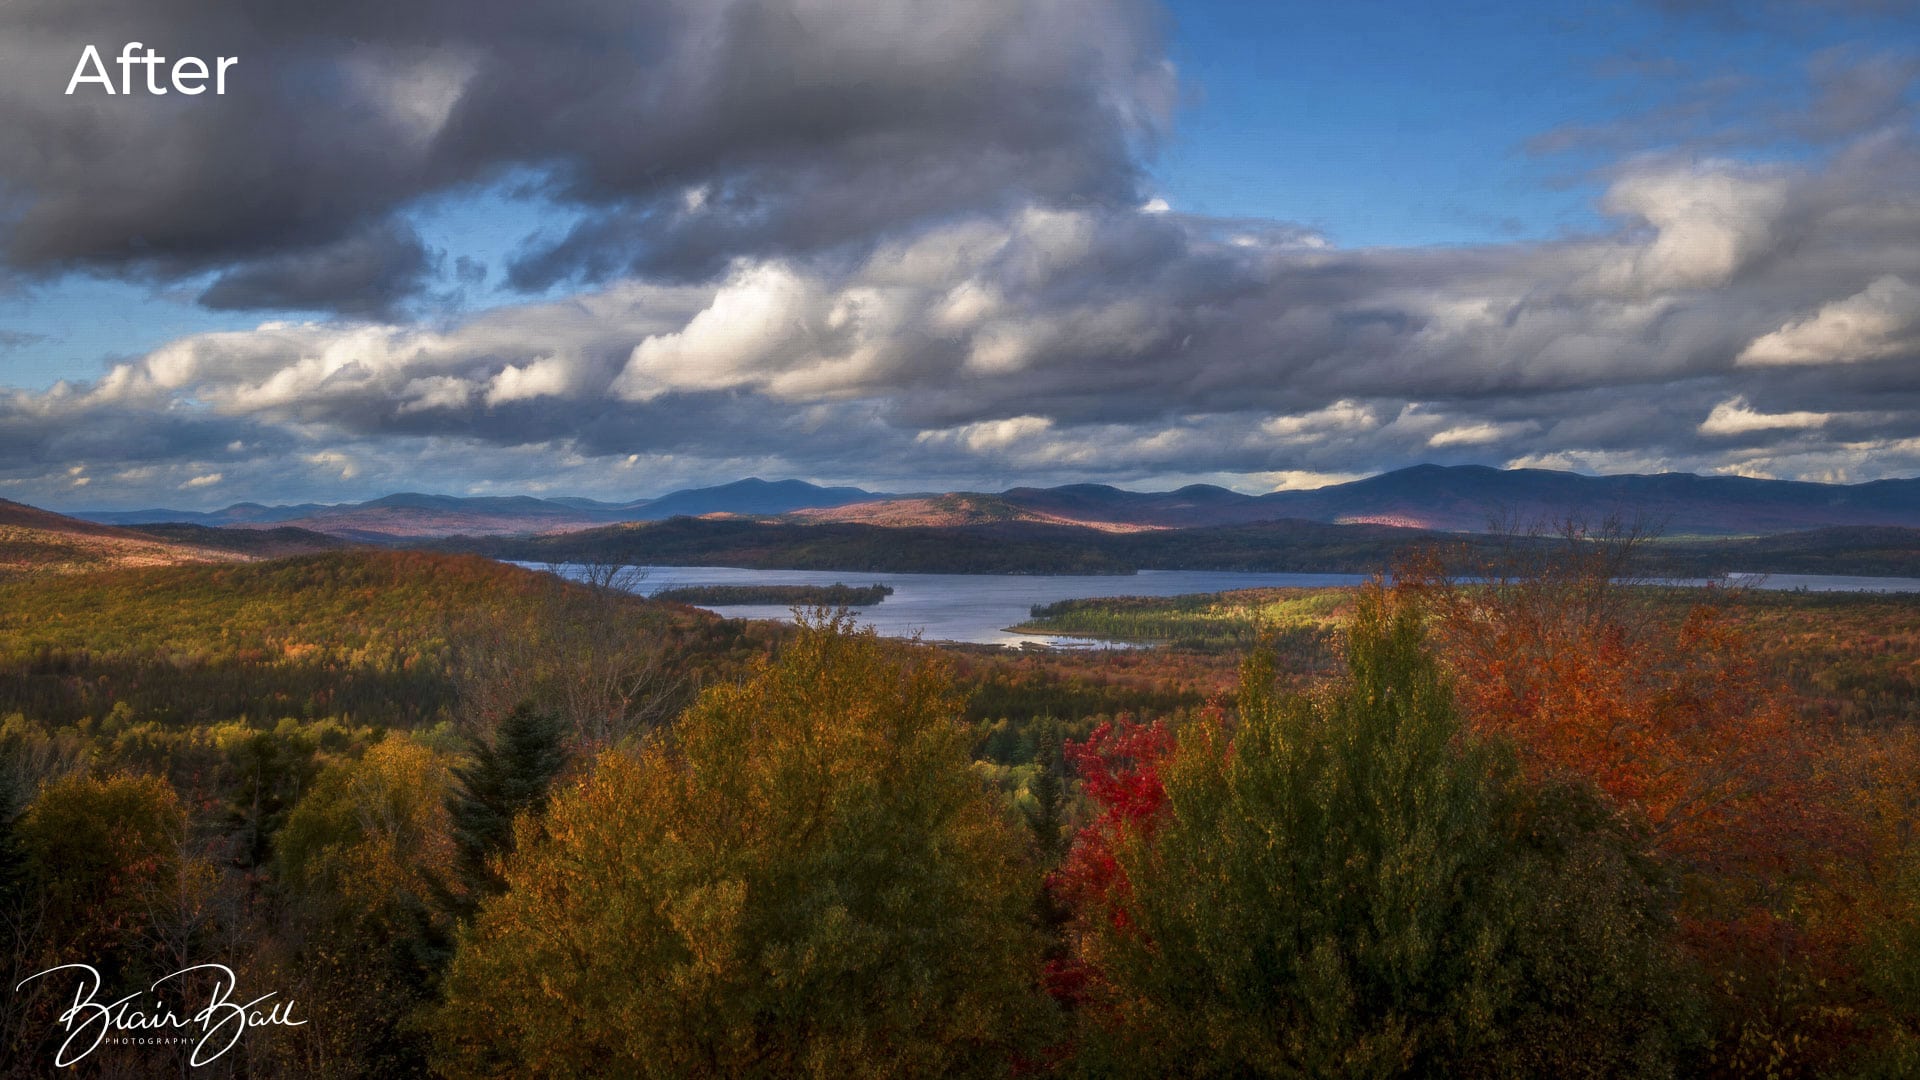 Rangeley Maine - Height of the Land - After -©Blair Ball Photography Image